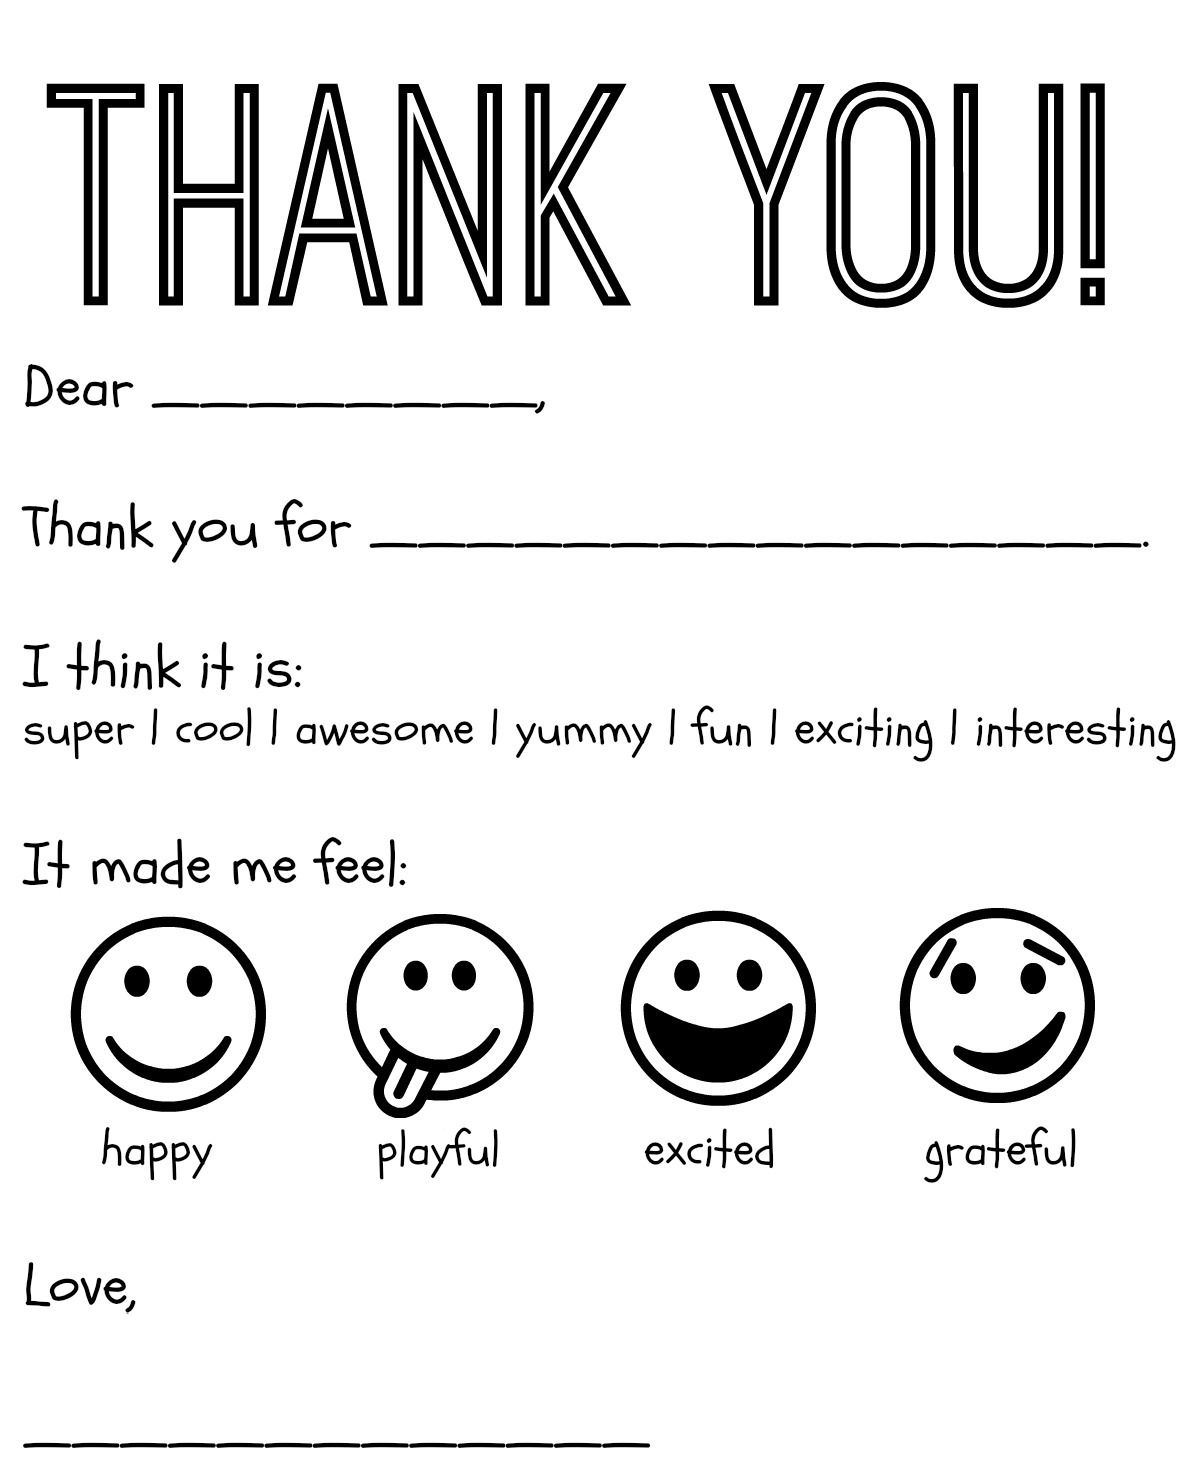 Free Printable Kids Thank You Cards To Color | Thank You Card - Free Printable Funny Thinking Of You Cards